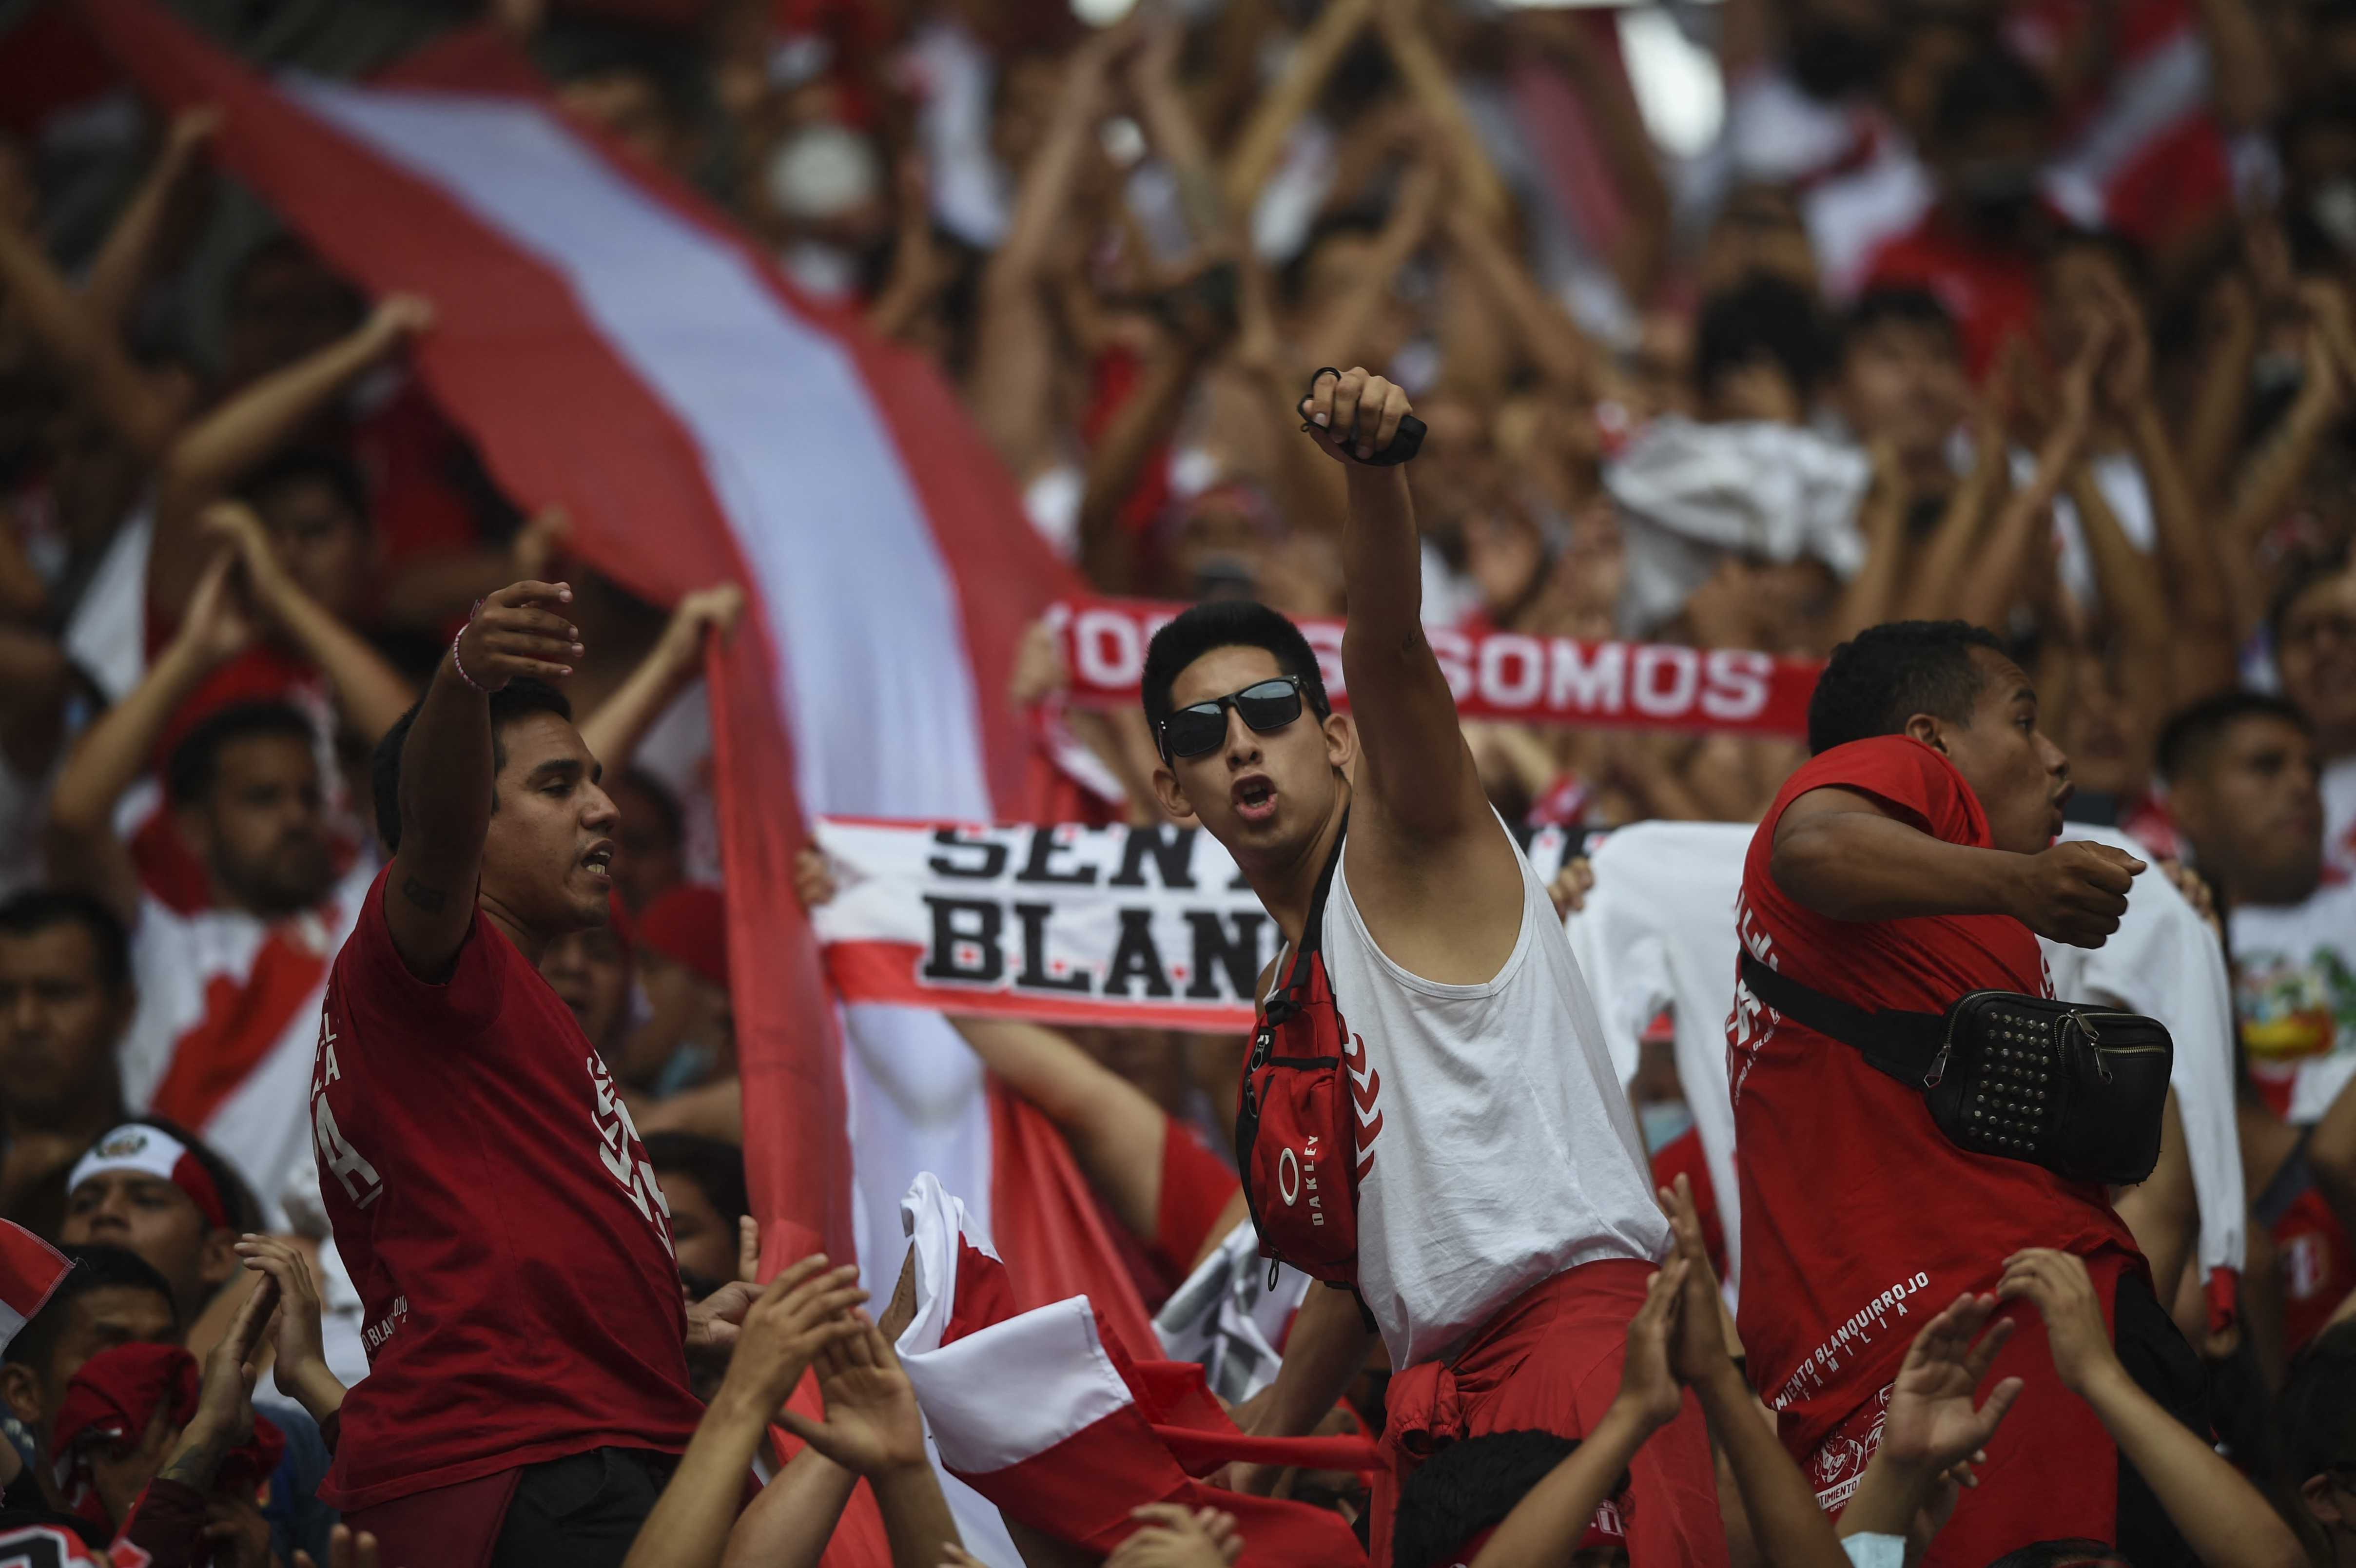 Fans of Peru cheer before the start of the South American qualification football match for the FIFA World Cup Qatar 2022 against Paraguay, at the National Stadium in Lima on March 29, 2022. (Photo by ERNESTO BENAVIDES / AFP)